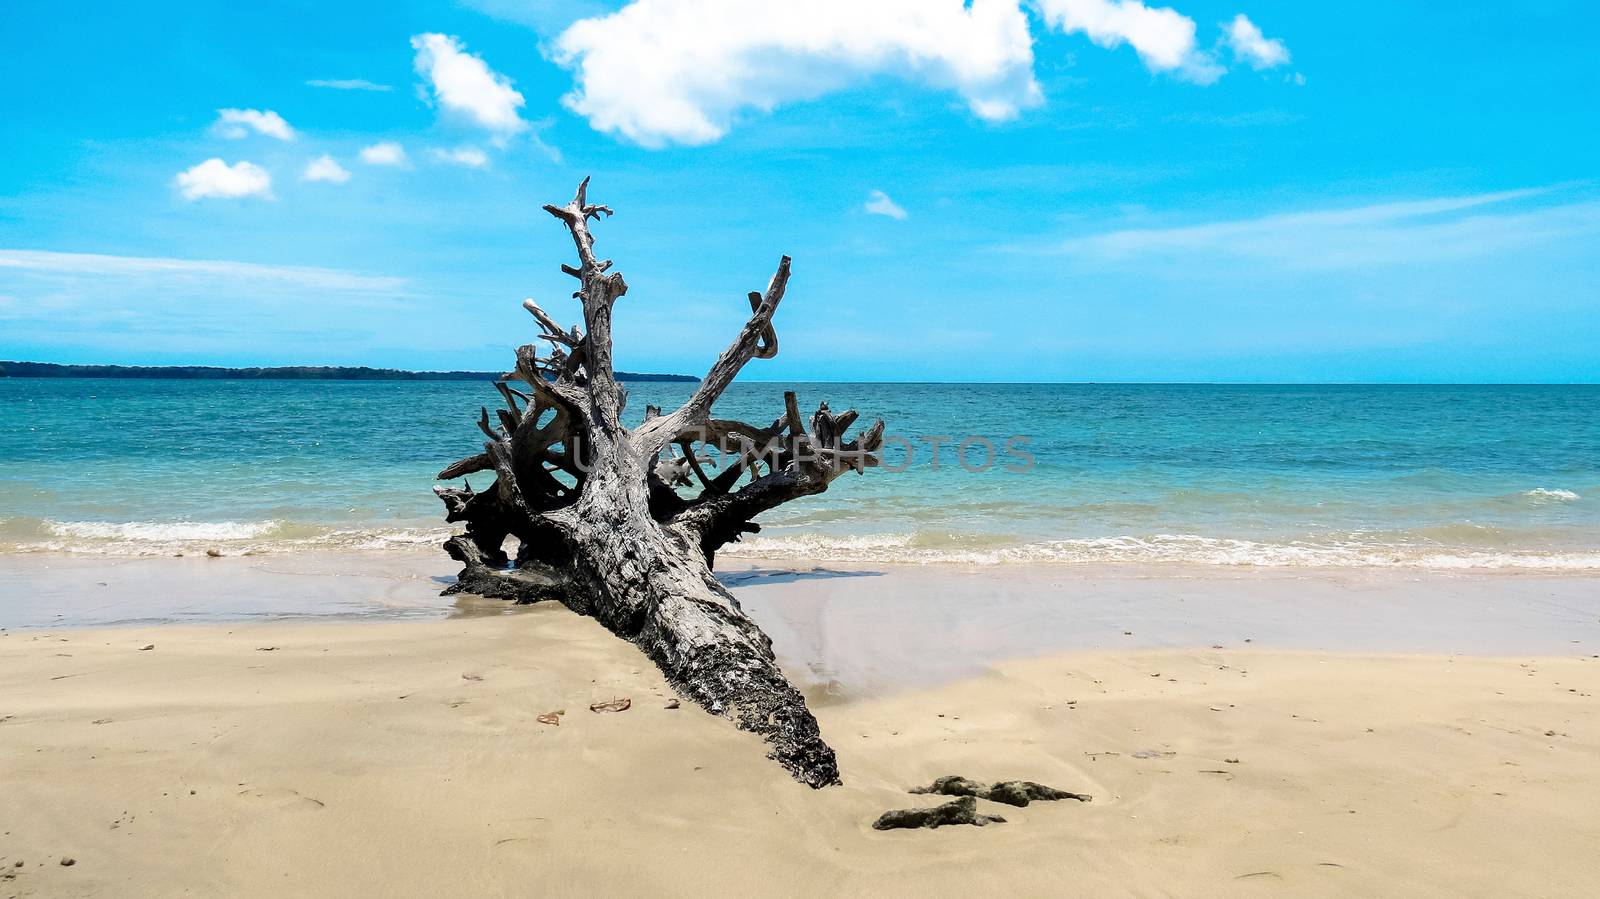 Uprooted tree on a beach by dushi82